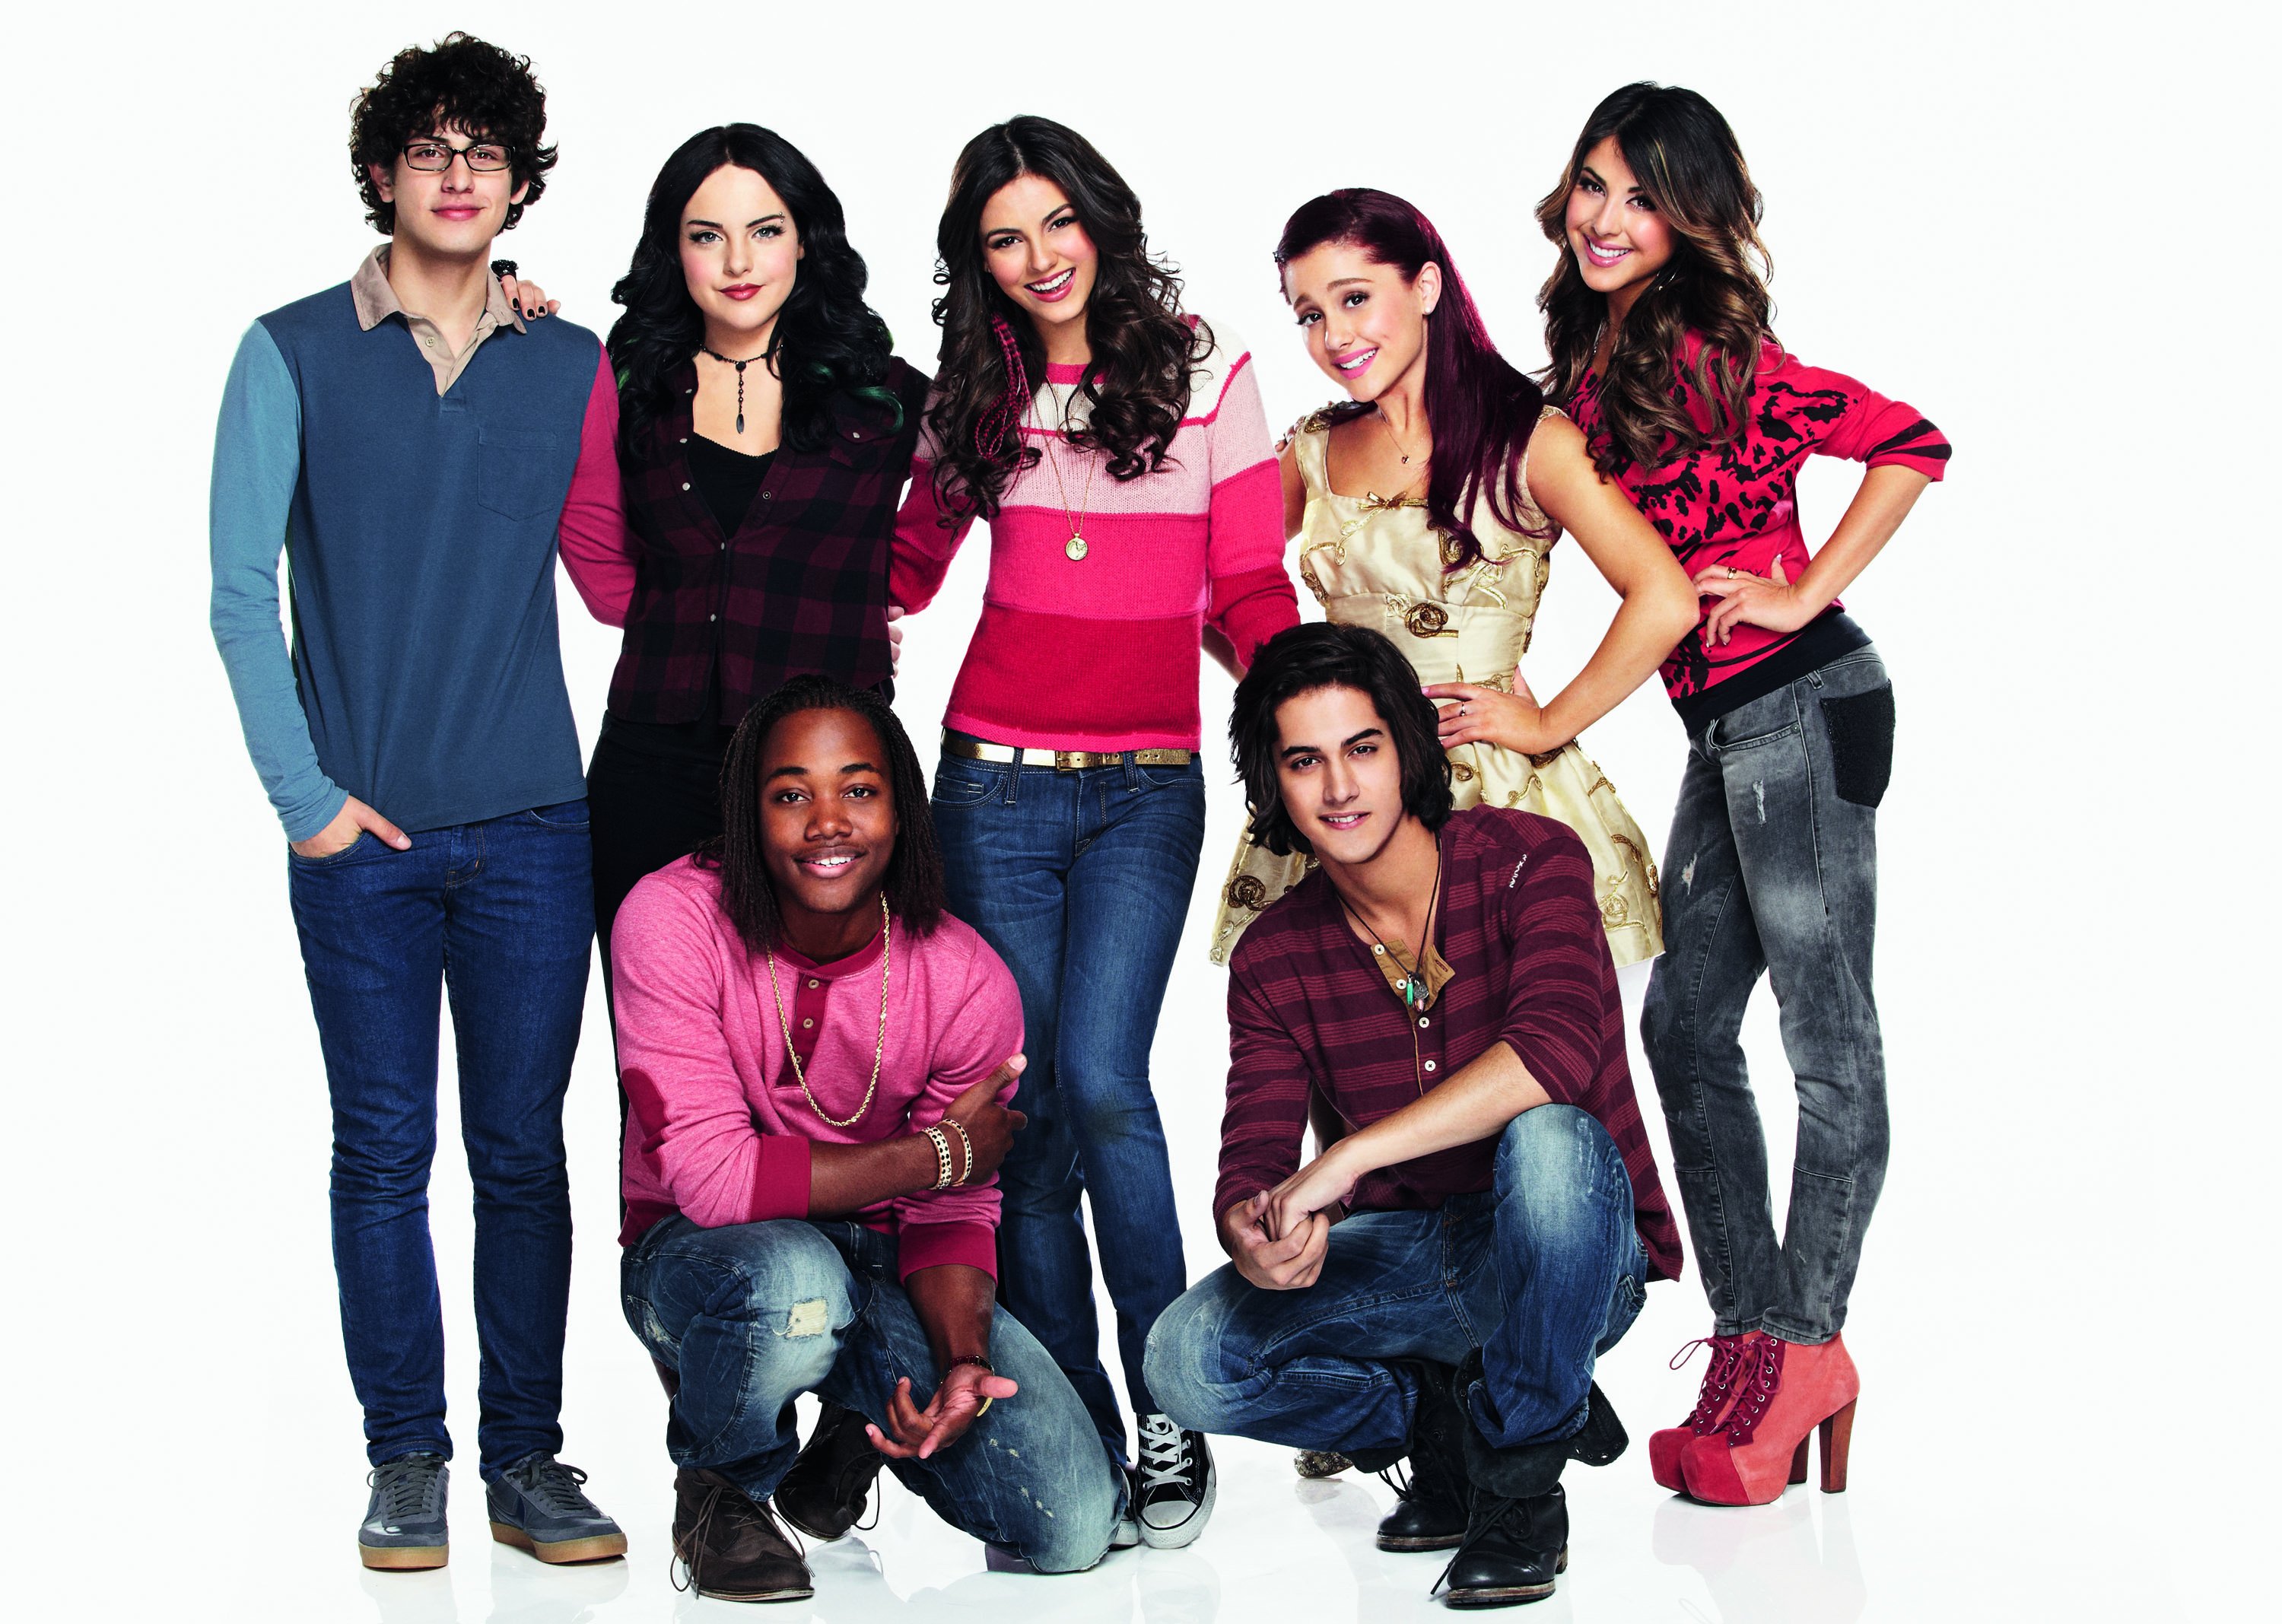 VICTORiOUS - TV Series